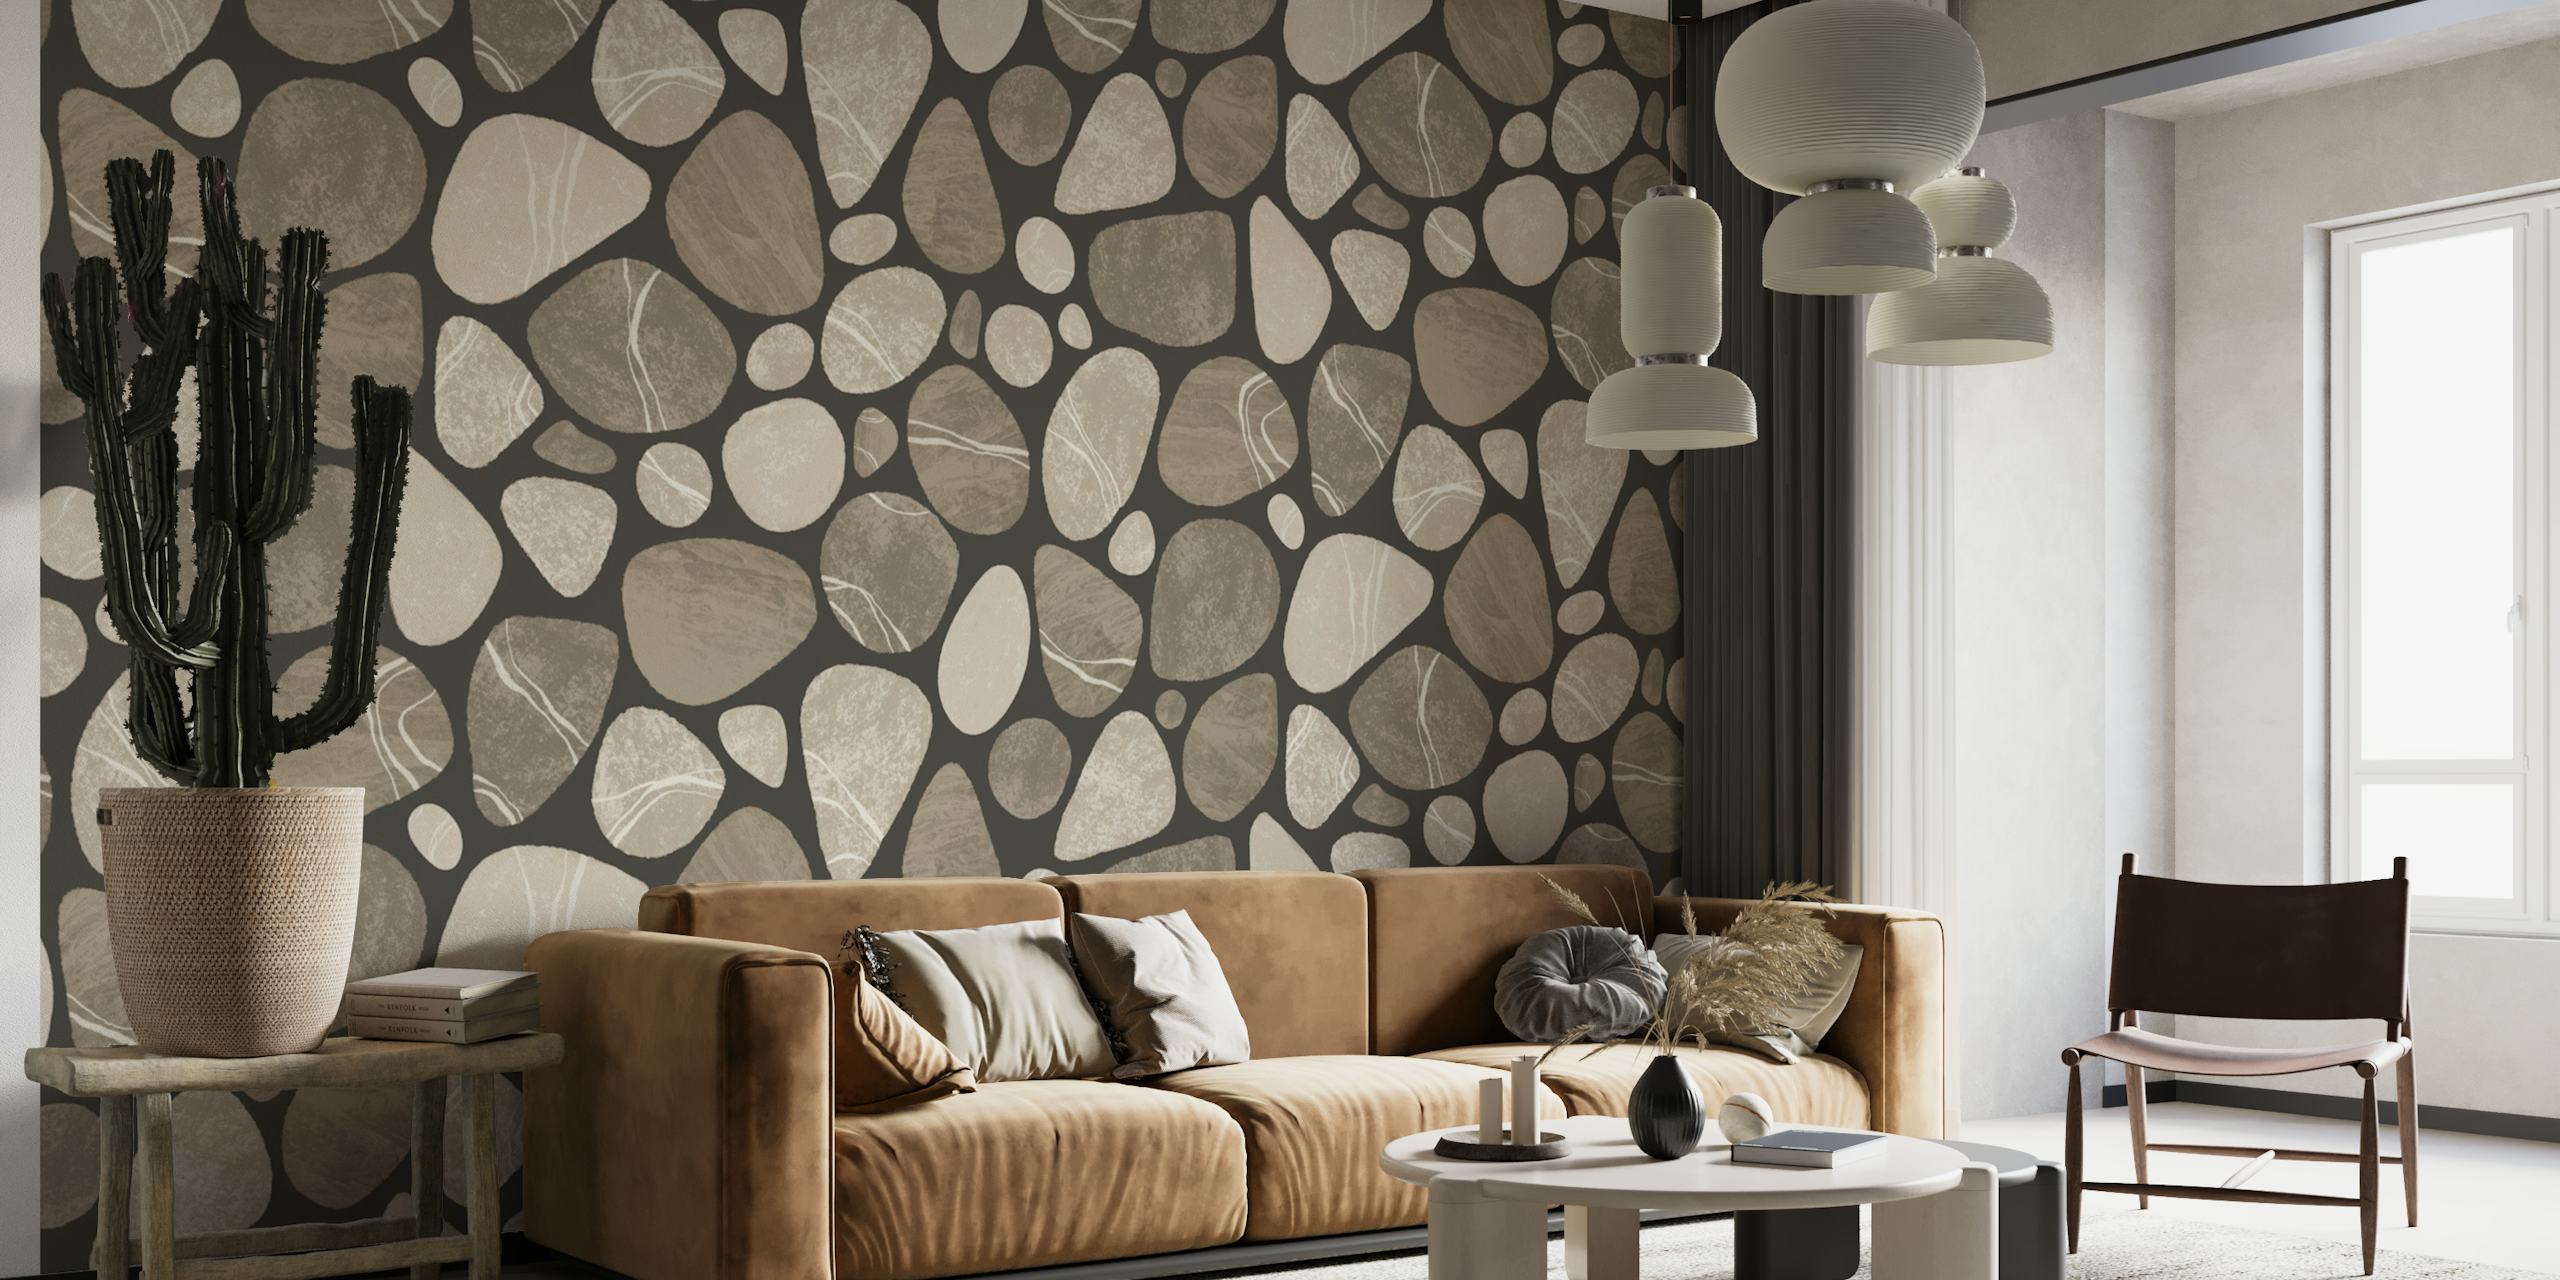 Pebble Serenity Stone Pattern Beauty Of Nature In Neutral Brown Beige Colors tapete